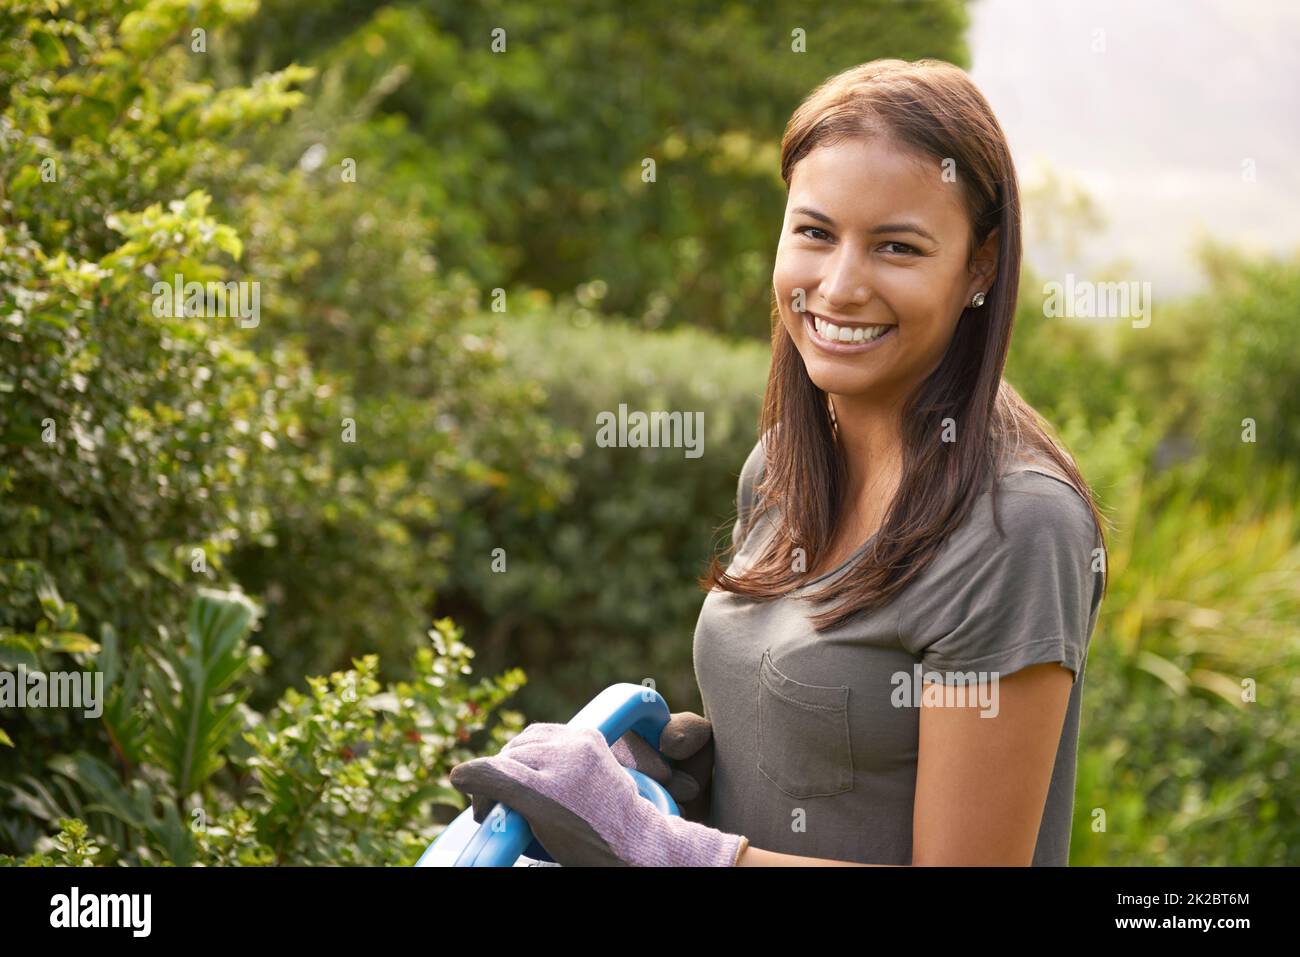 Surrounded by natures beauty. Shot of an attractive young woman watering her garden. Stock Photo